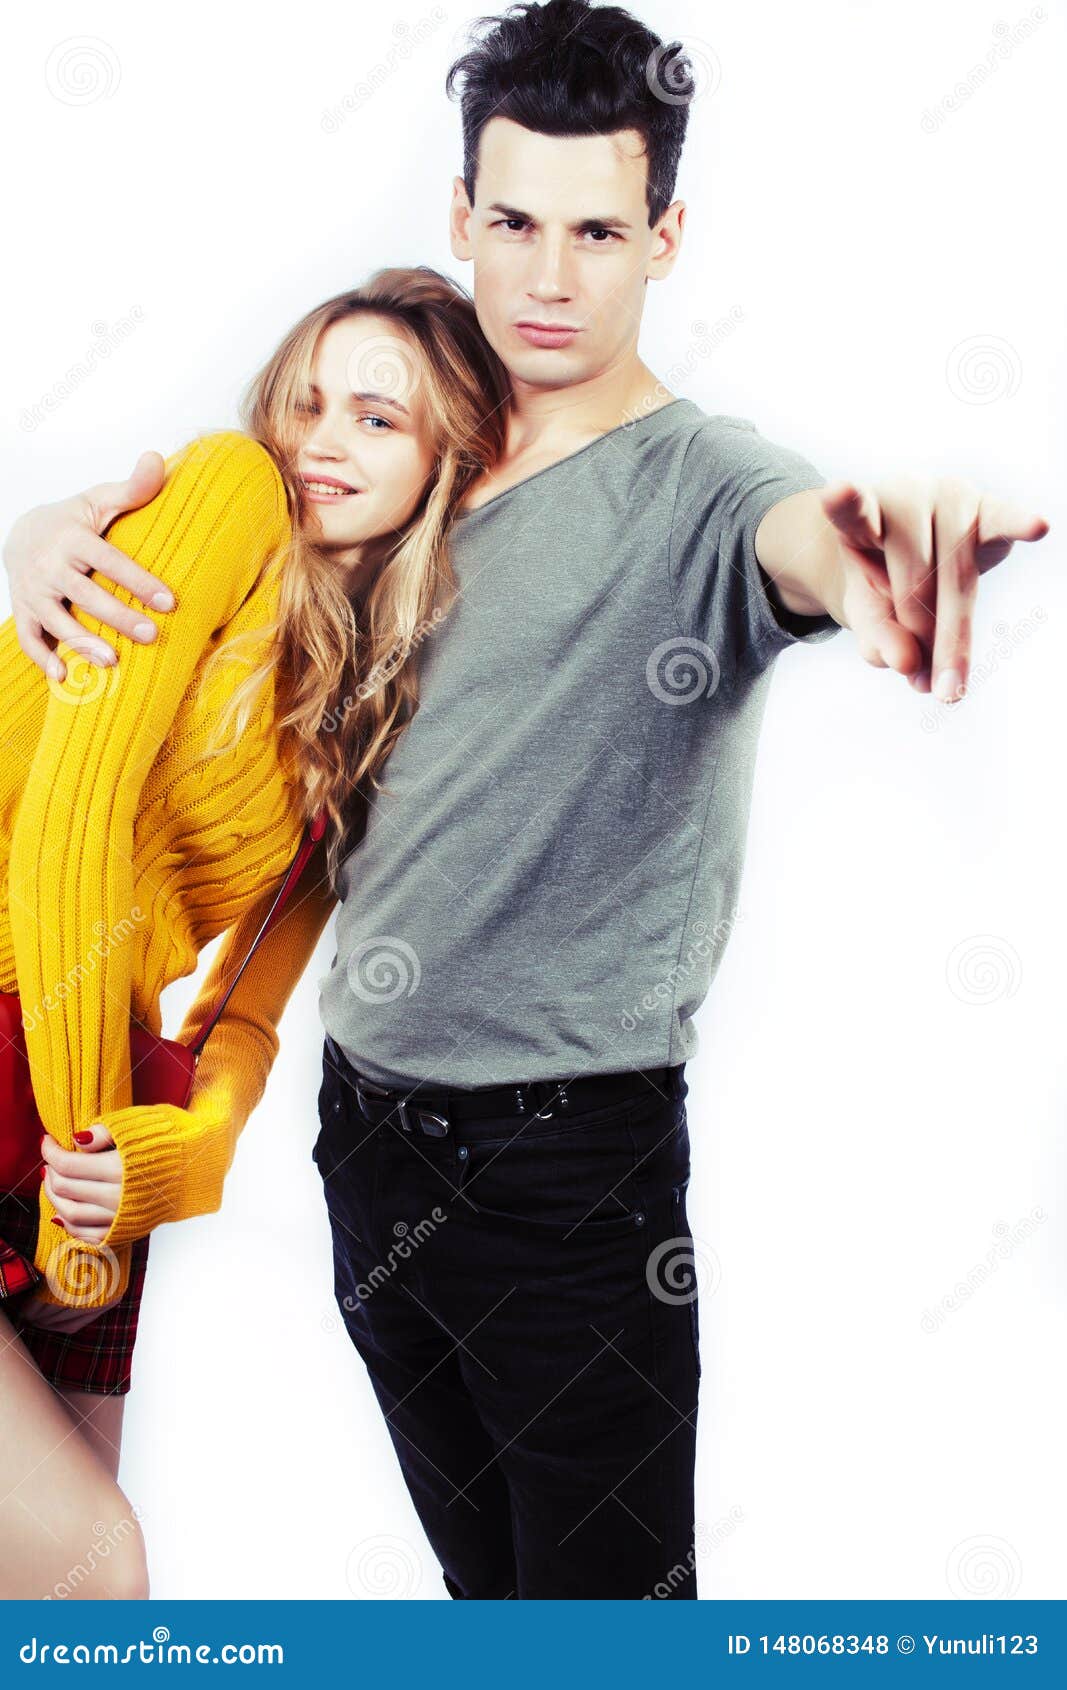 Best Friends Teenage Couple Girl And Boy Together Having Fun Posing Emotional On White Background Couple Happy Smiling Stock Photo Image Of Portrait Lifestyle